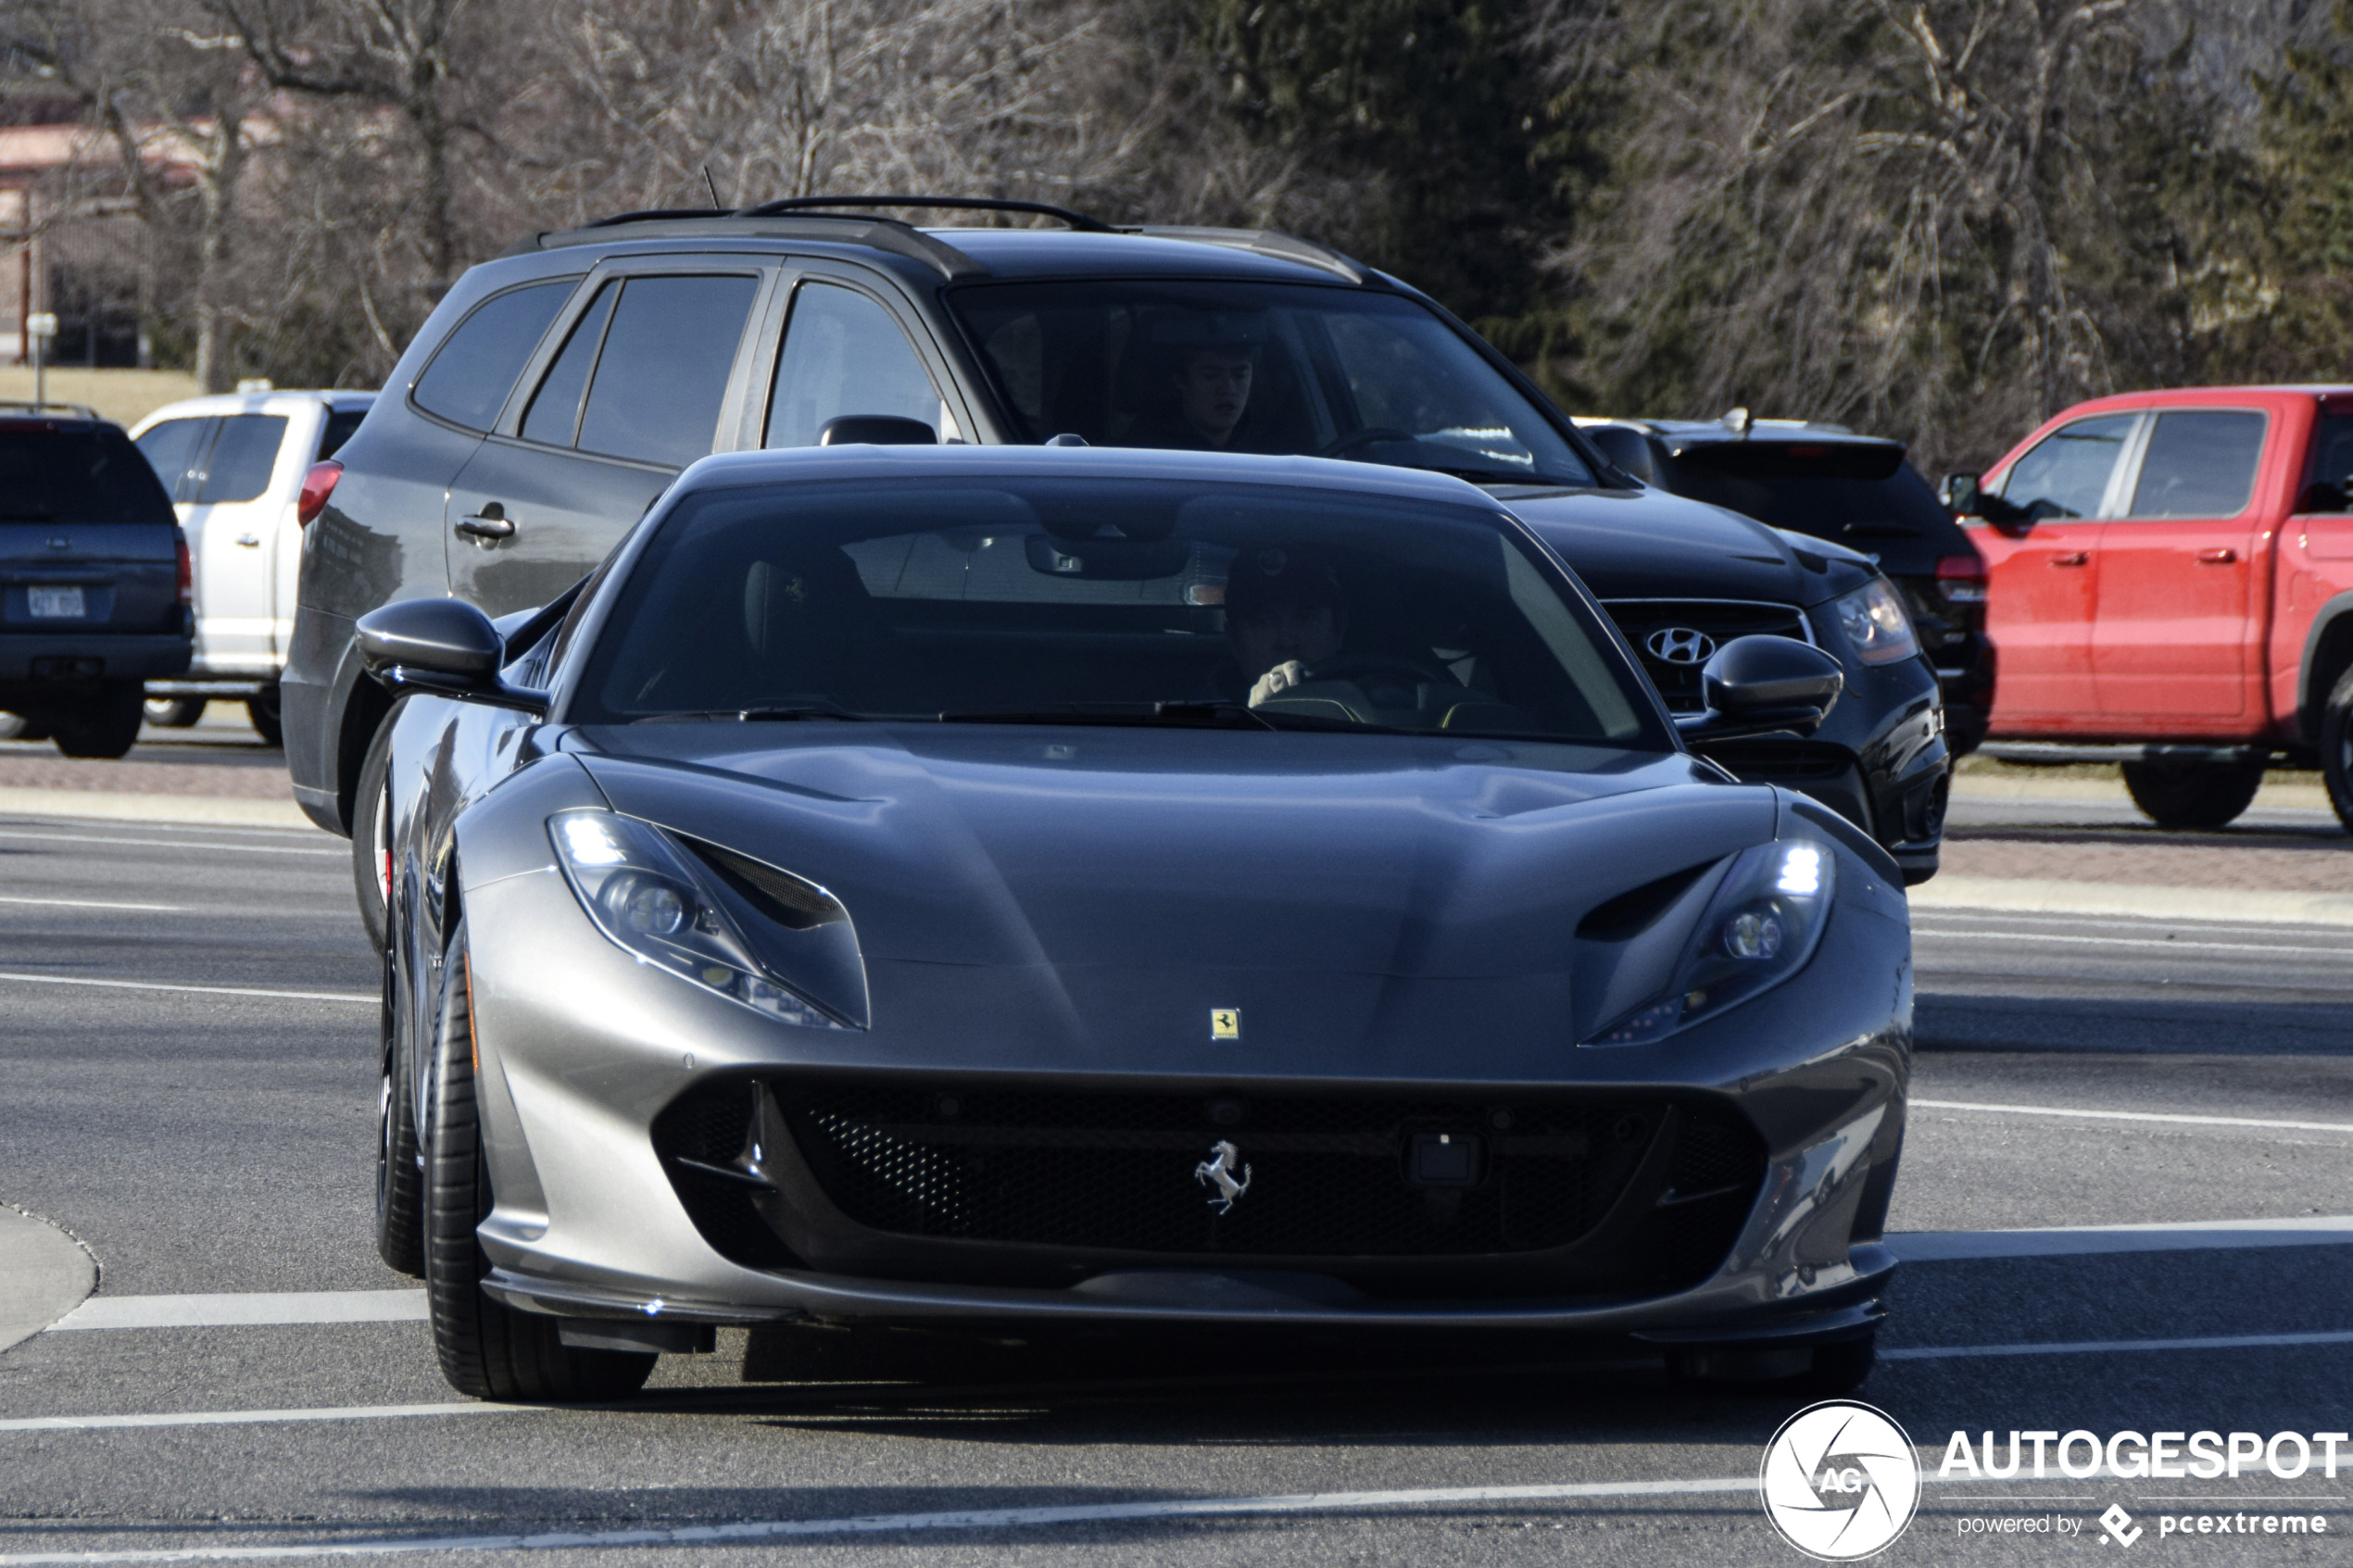 Spot of the day USA: Ferrari 812 Superfast by OPspotters